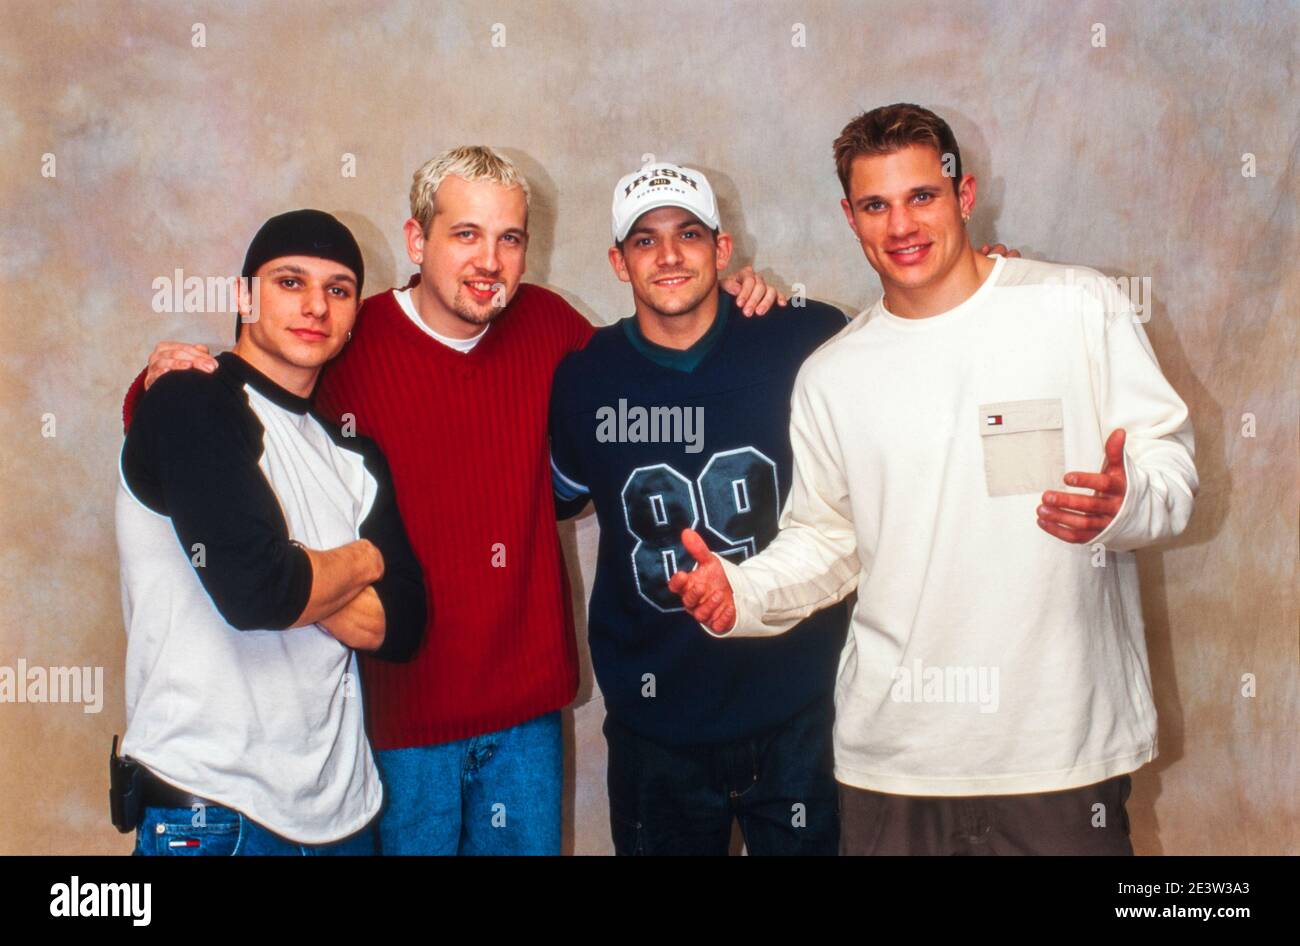 https://c8.alamy.com/comp/2E3W3A3/new-york-usa-oct-10-1999-98-degrees-was-between-1997-and-2002-a-very-popular-boyband-in-the-usa-2E3W3A3.jpg